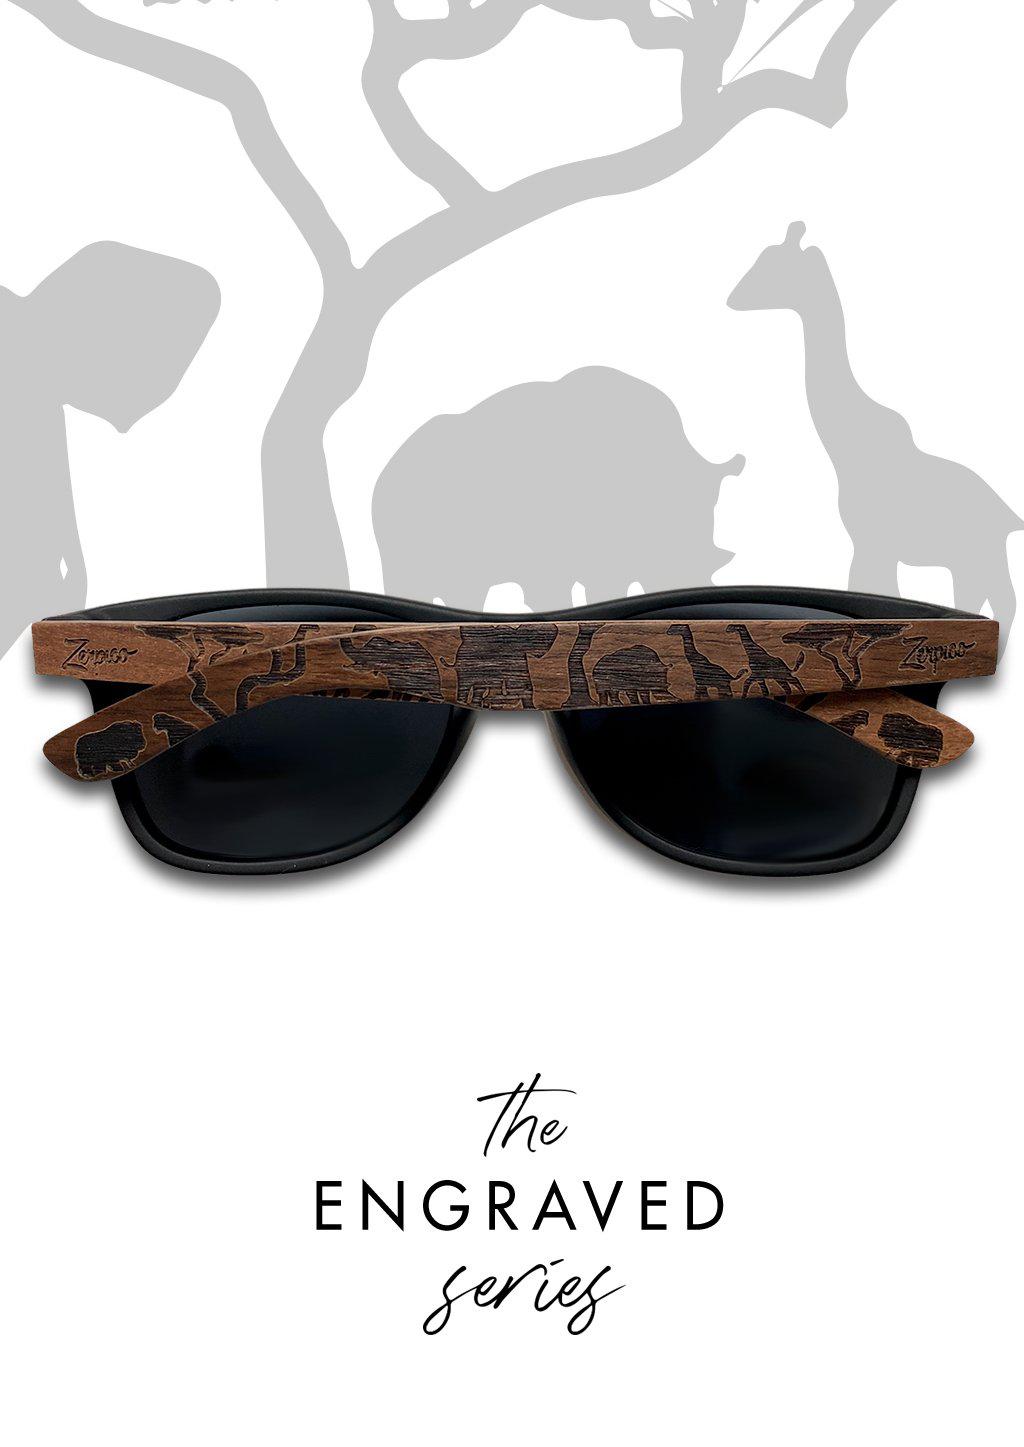 Engraved wooden sunglasses Inspired by the open plains and animals of the African savanna.